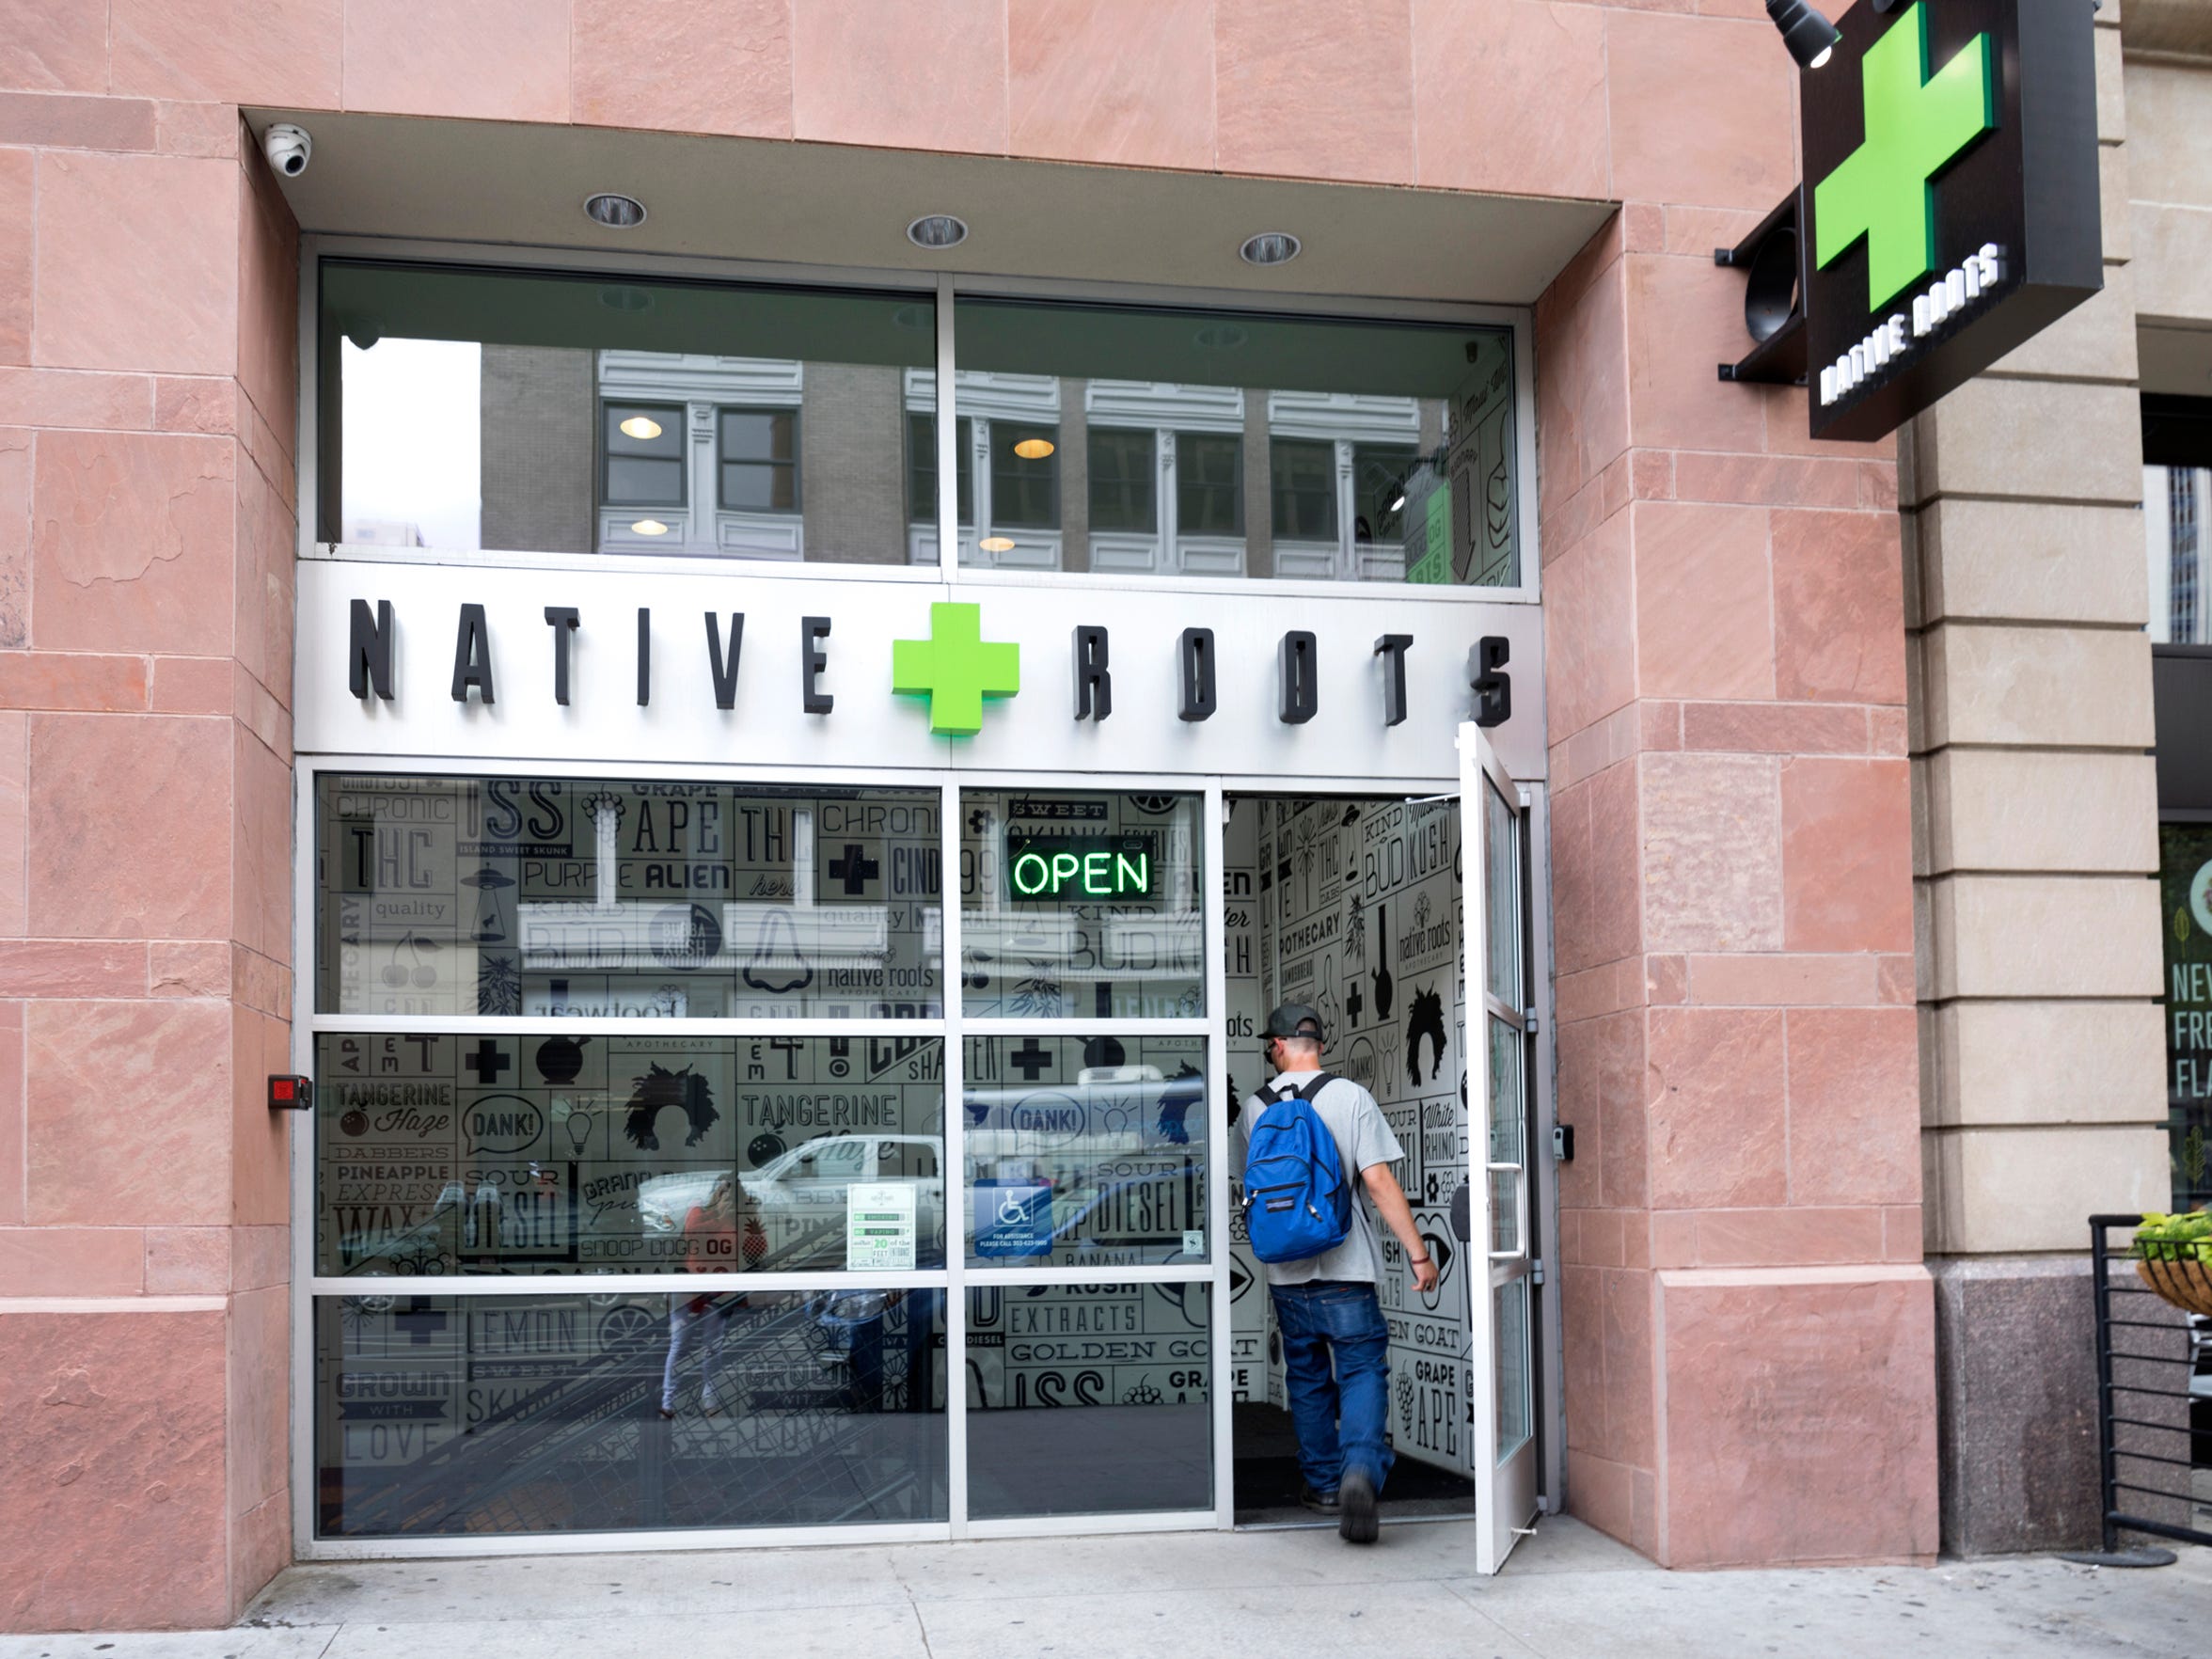 Dispensaries like Native Root are a common sight in